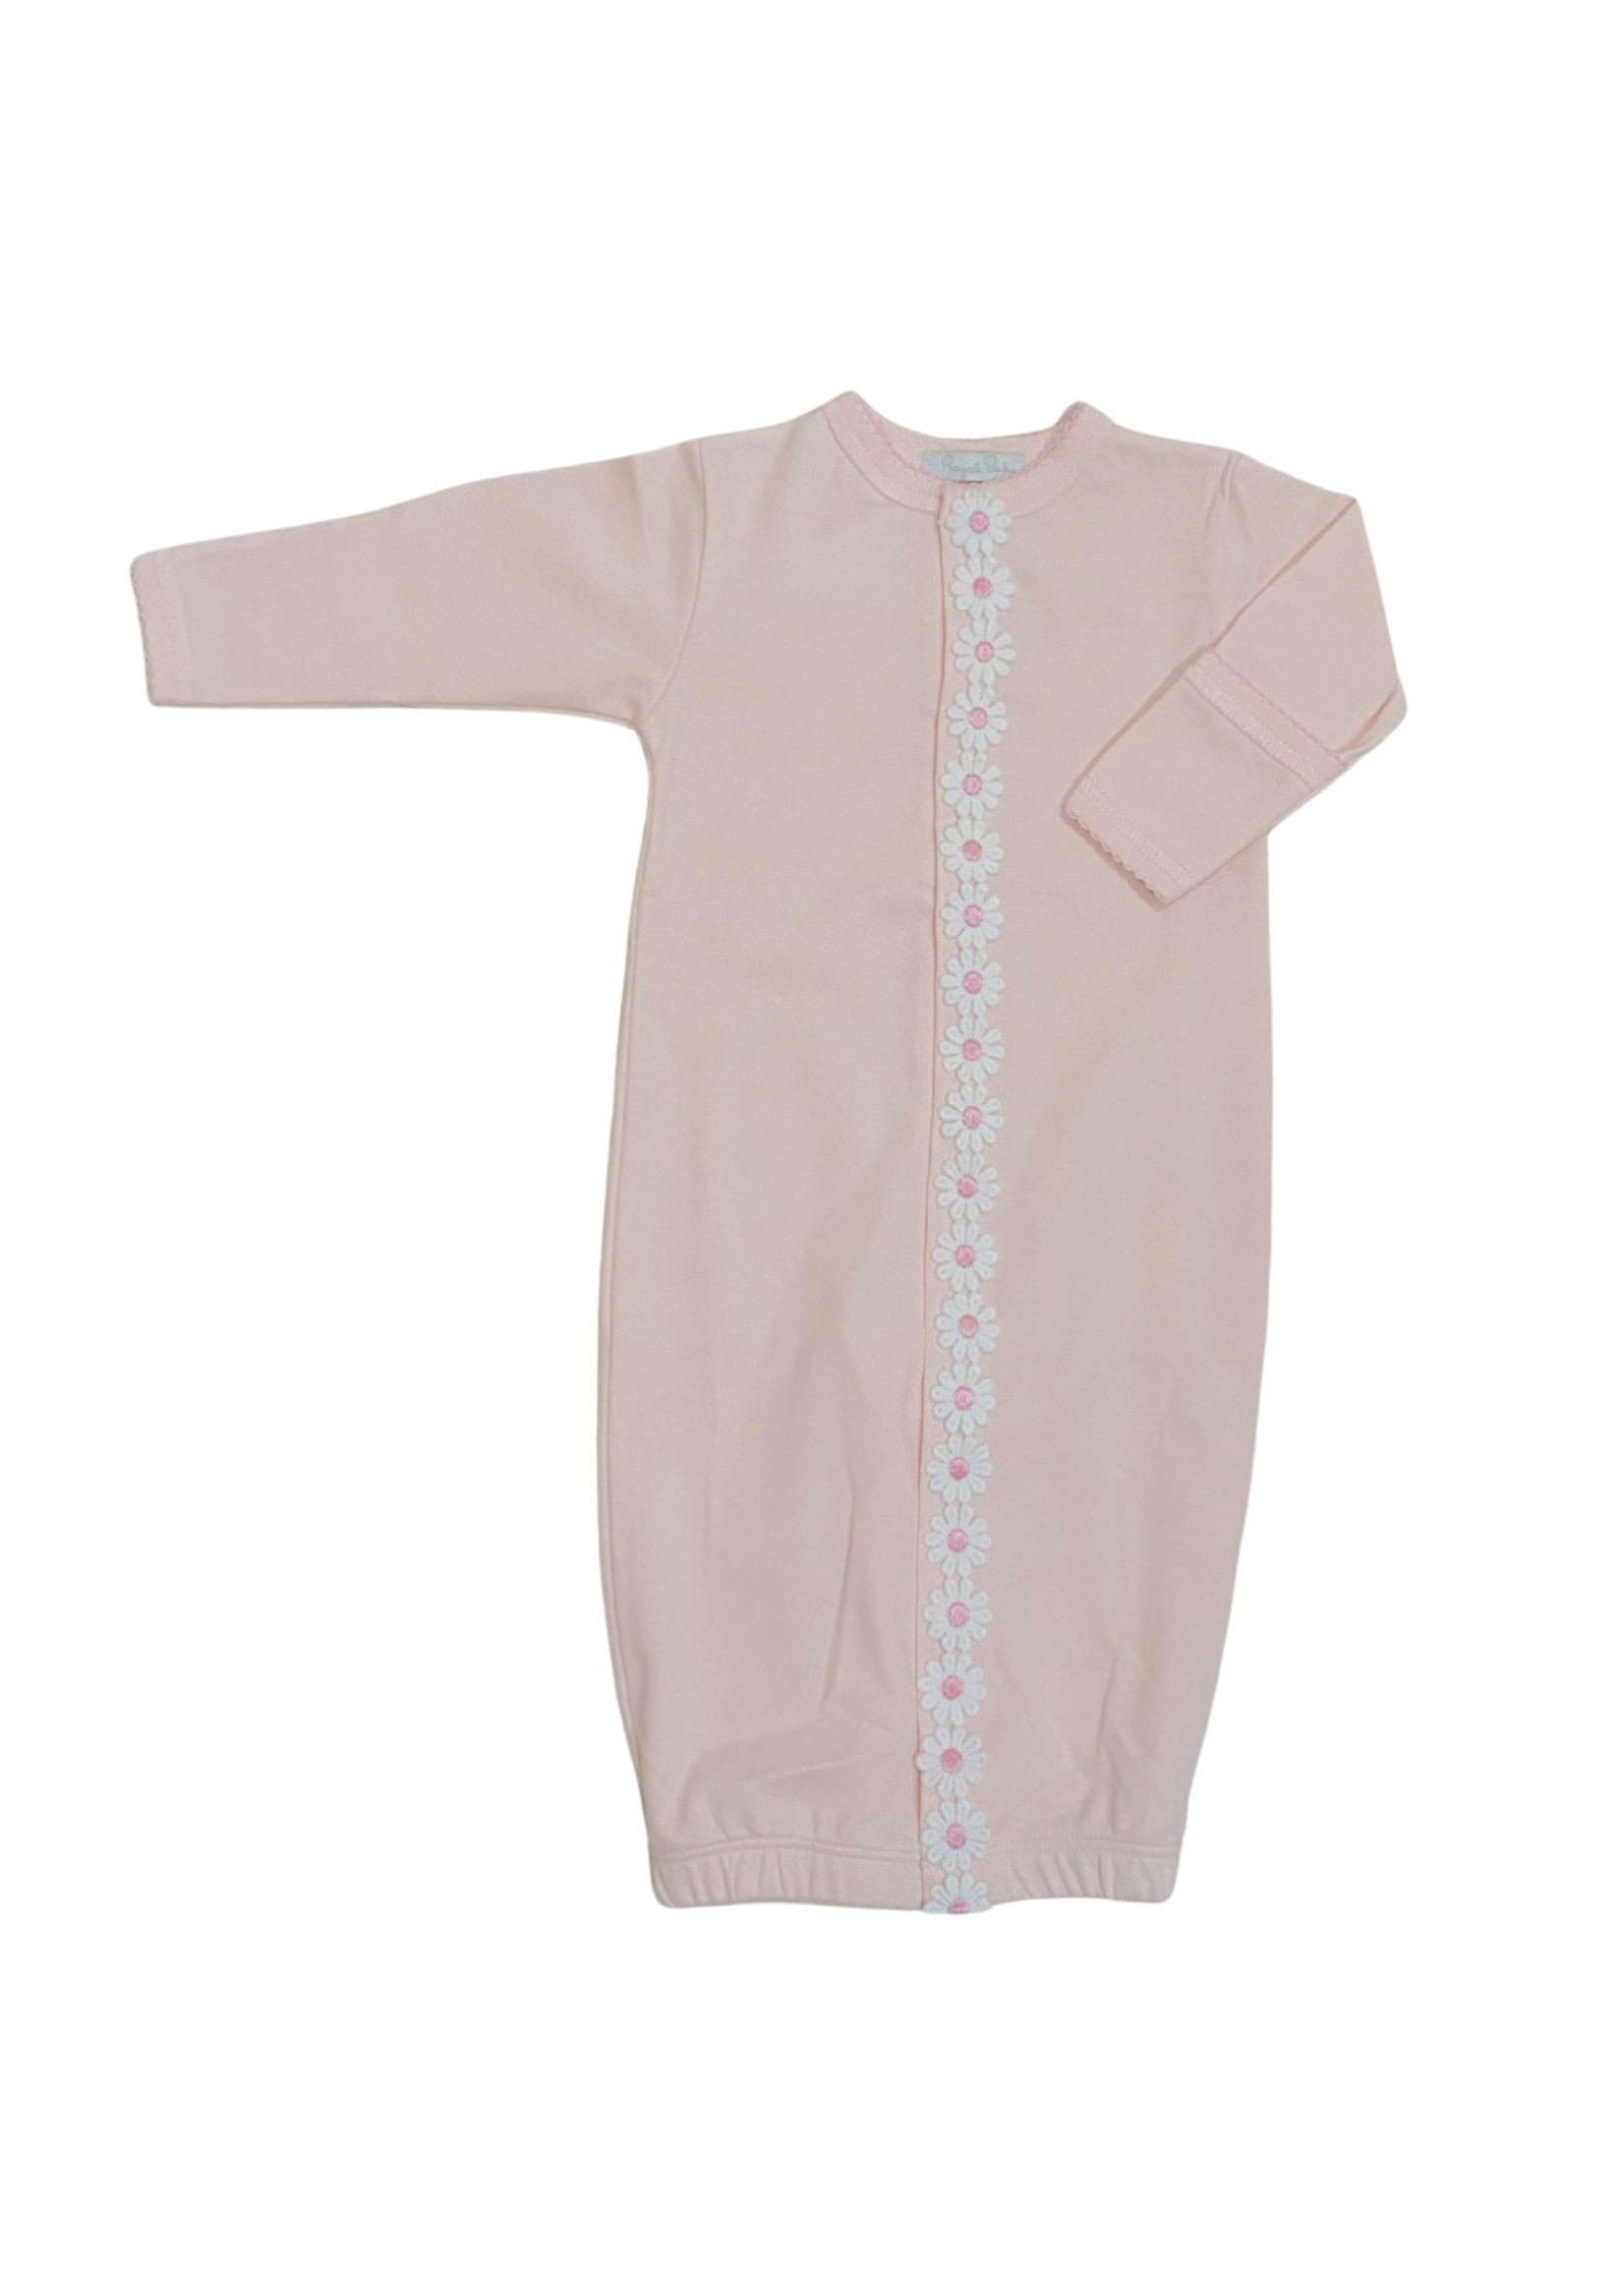 Royal Baby Royal Baby Pink with Daisy Trim Converter Gown